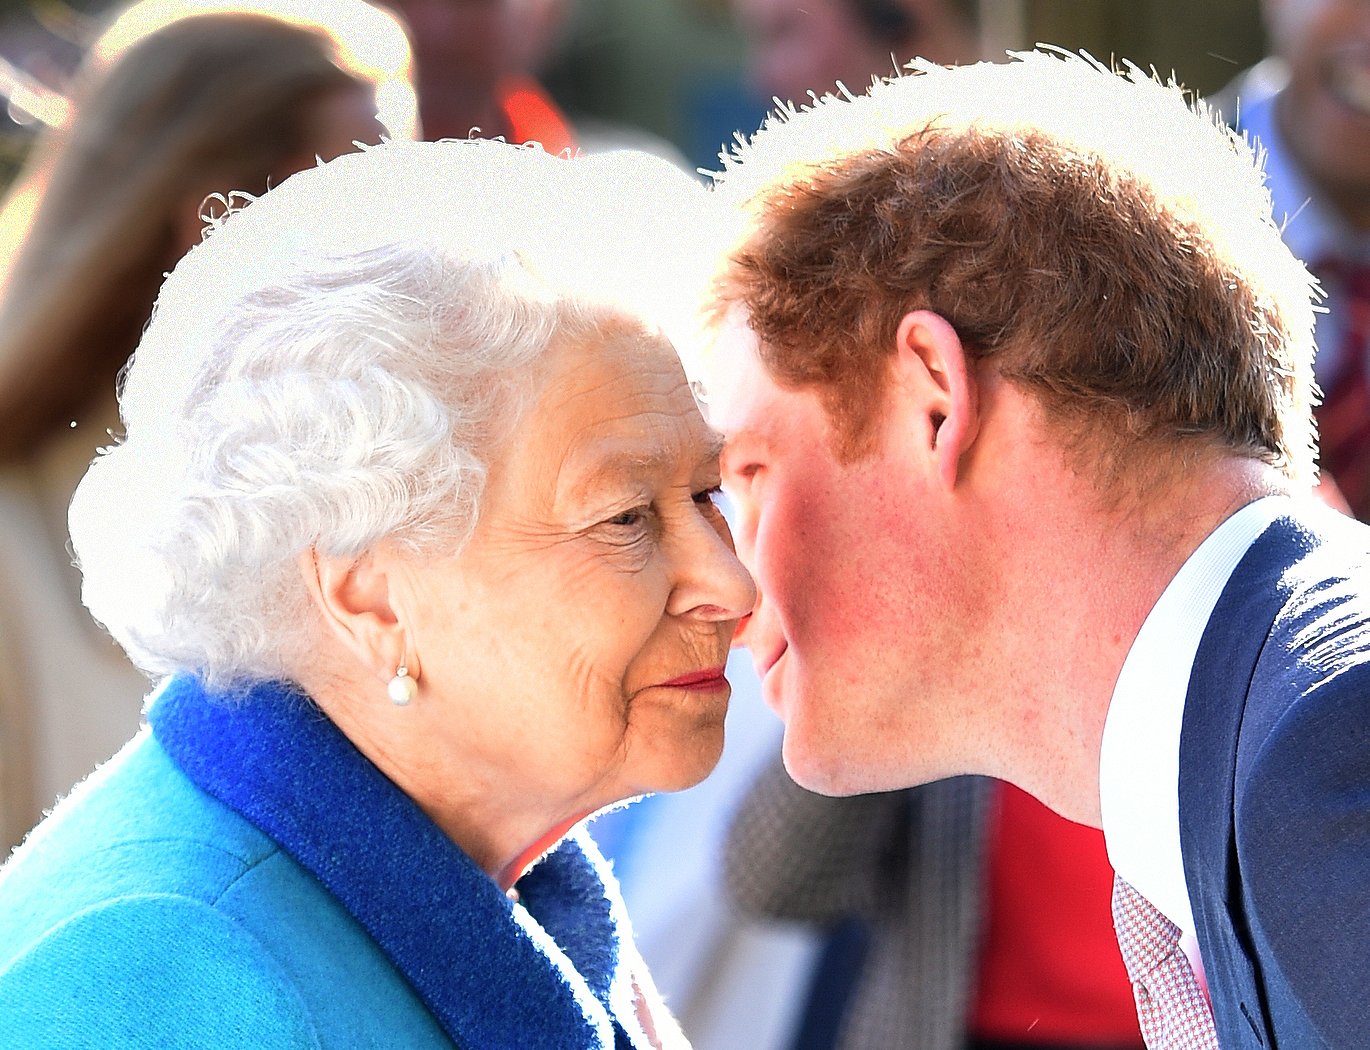 Queen Elizabeth II and Prince Harry attending at the annual Chelsea Flower show at Royal Hospital Chelsea on May 18, 2015 in London, England.│Source: Getty Images